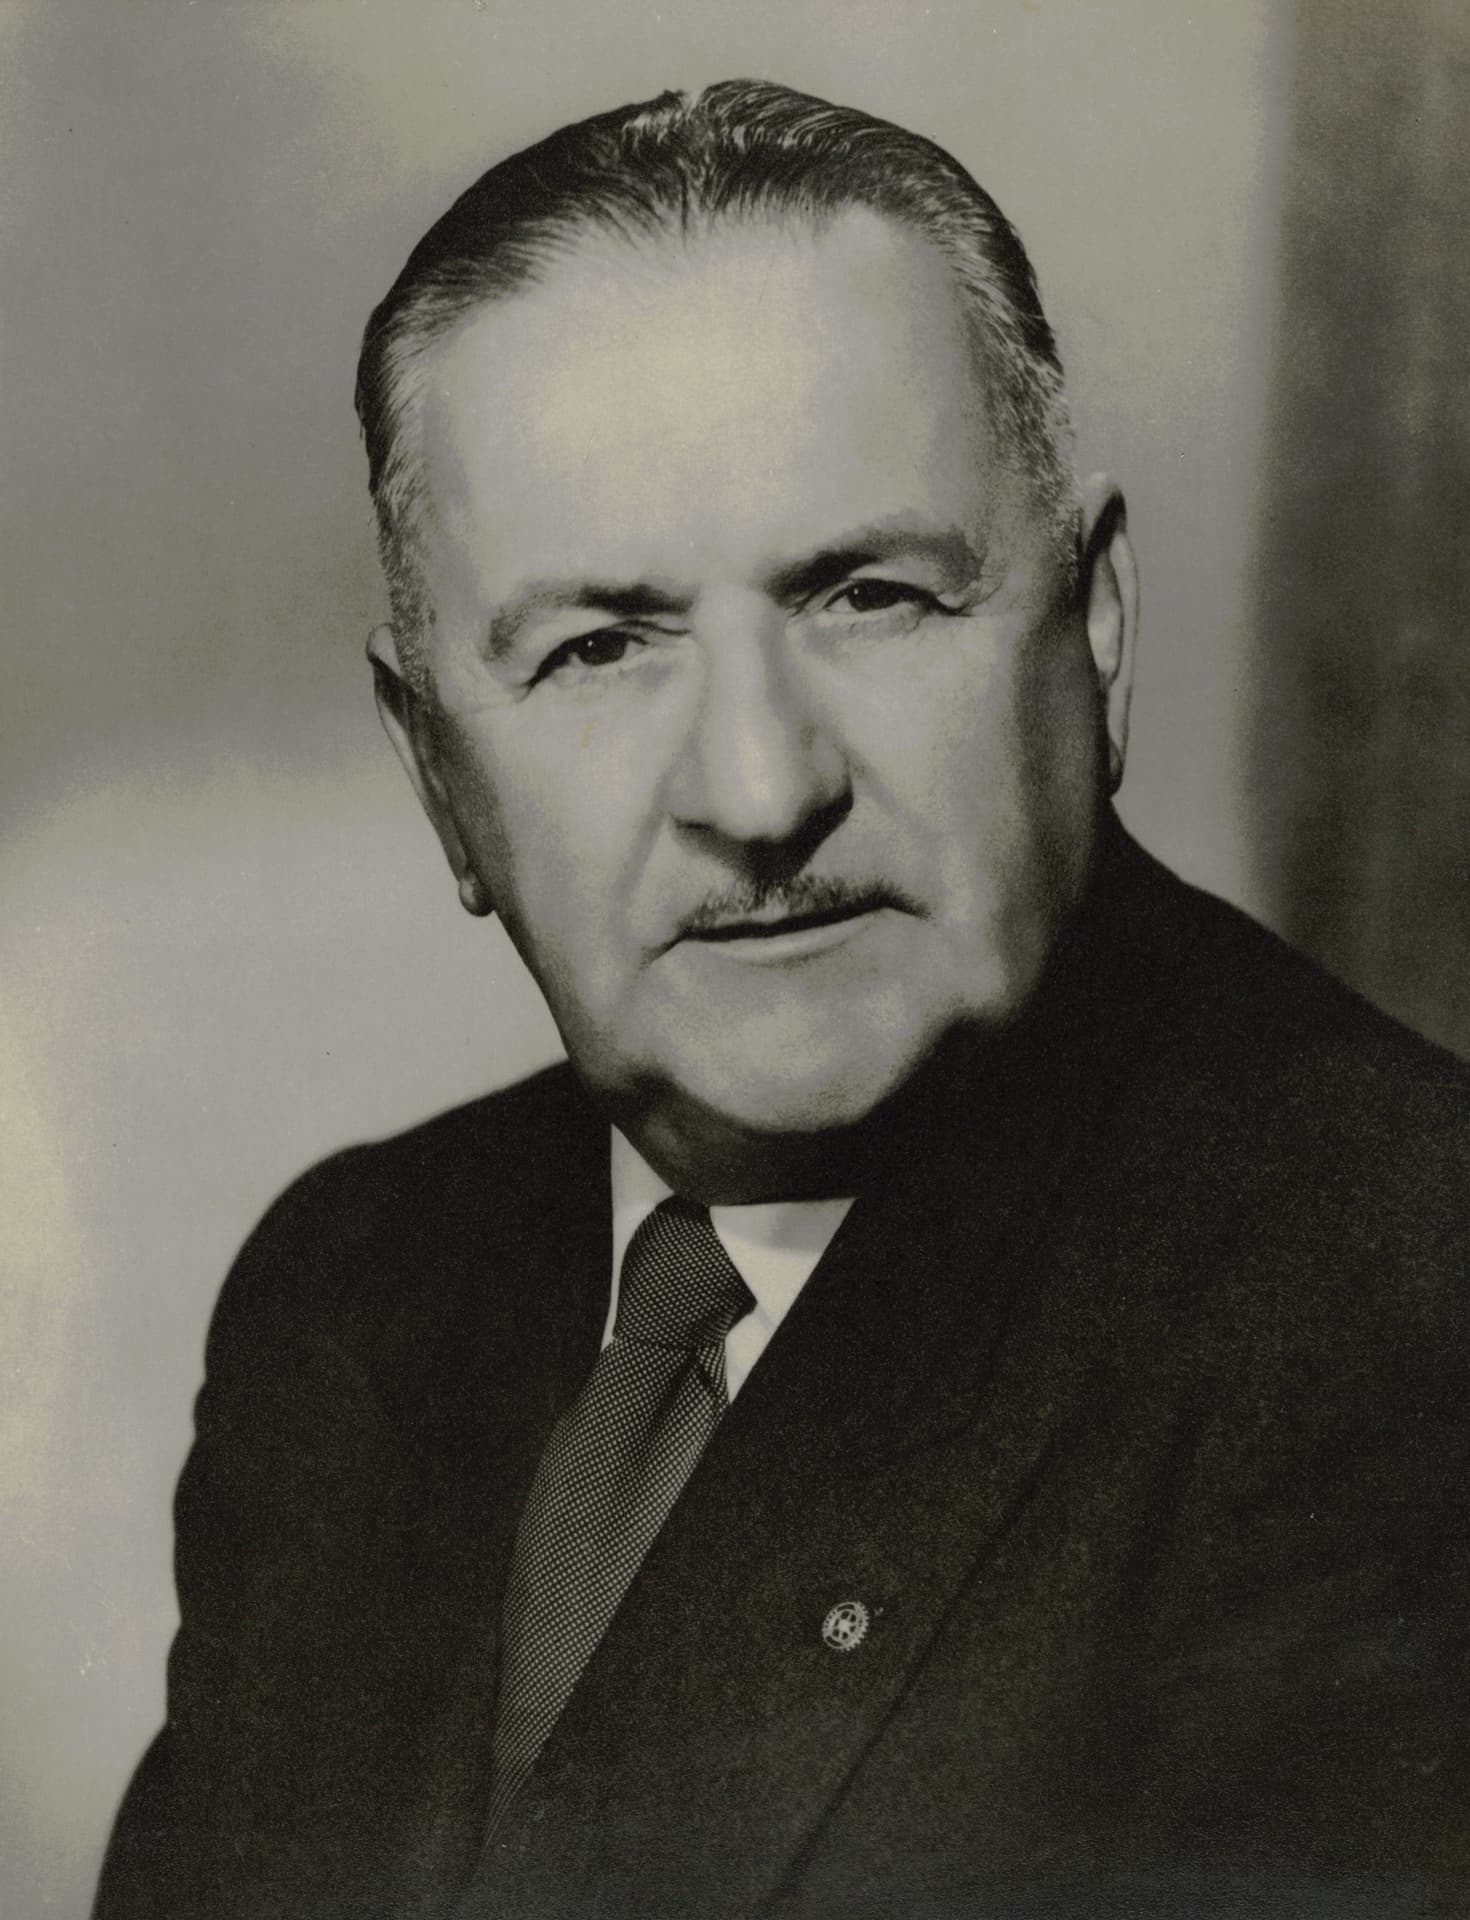 John Digby Leach — Commissioner from 1953 to 1964